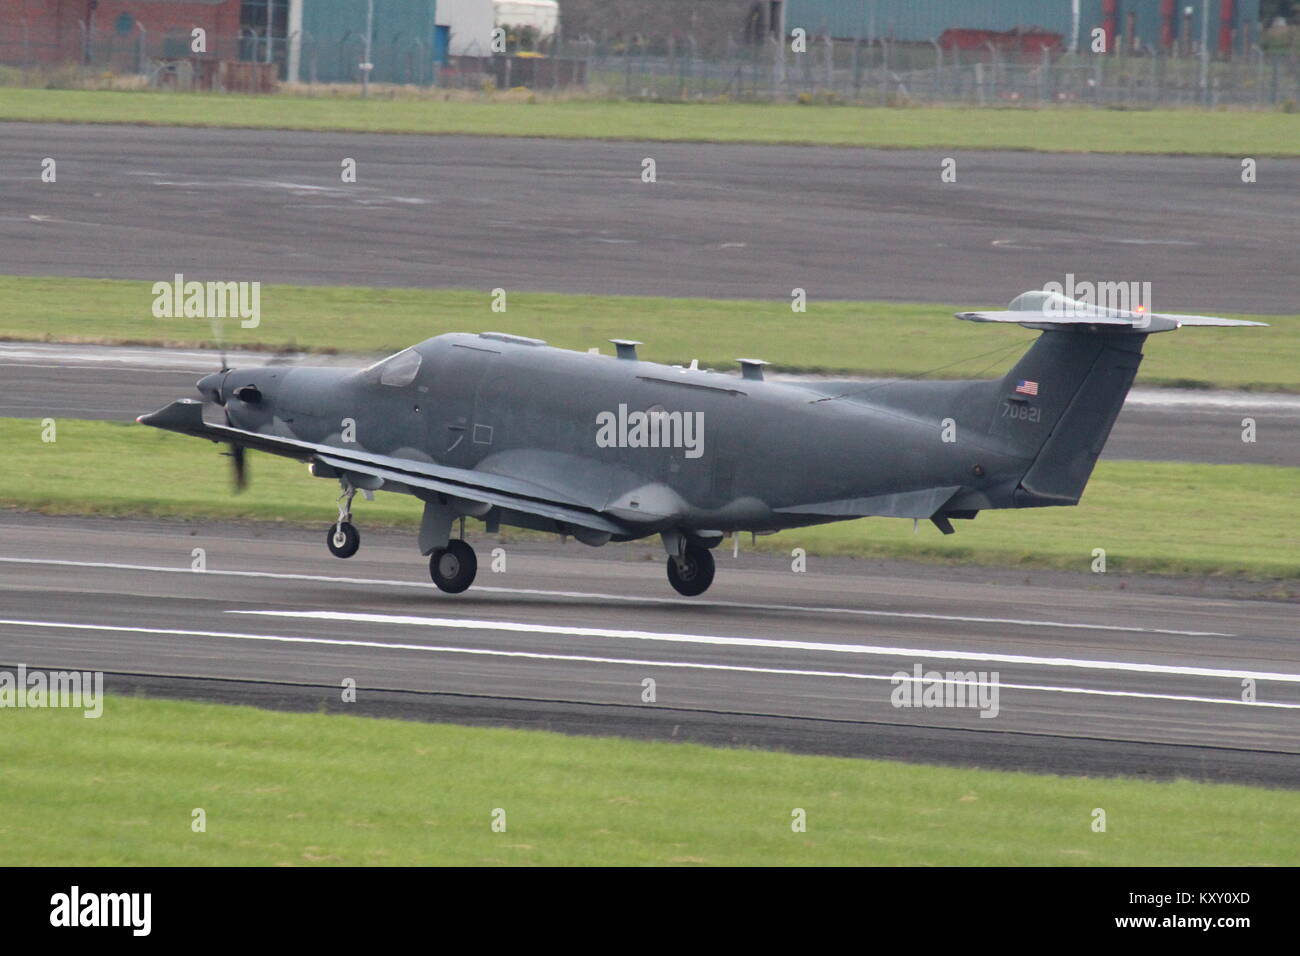 07-0821, a Pilatus U-28A operated by the United States Air Force, at Prestwick International Airport in Ayrshire. Stock Photo